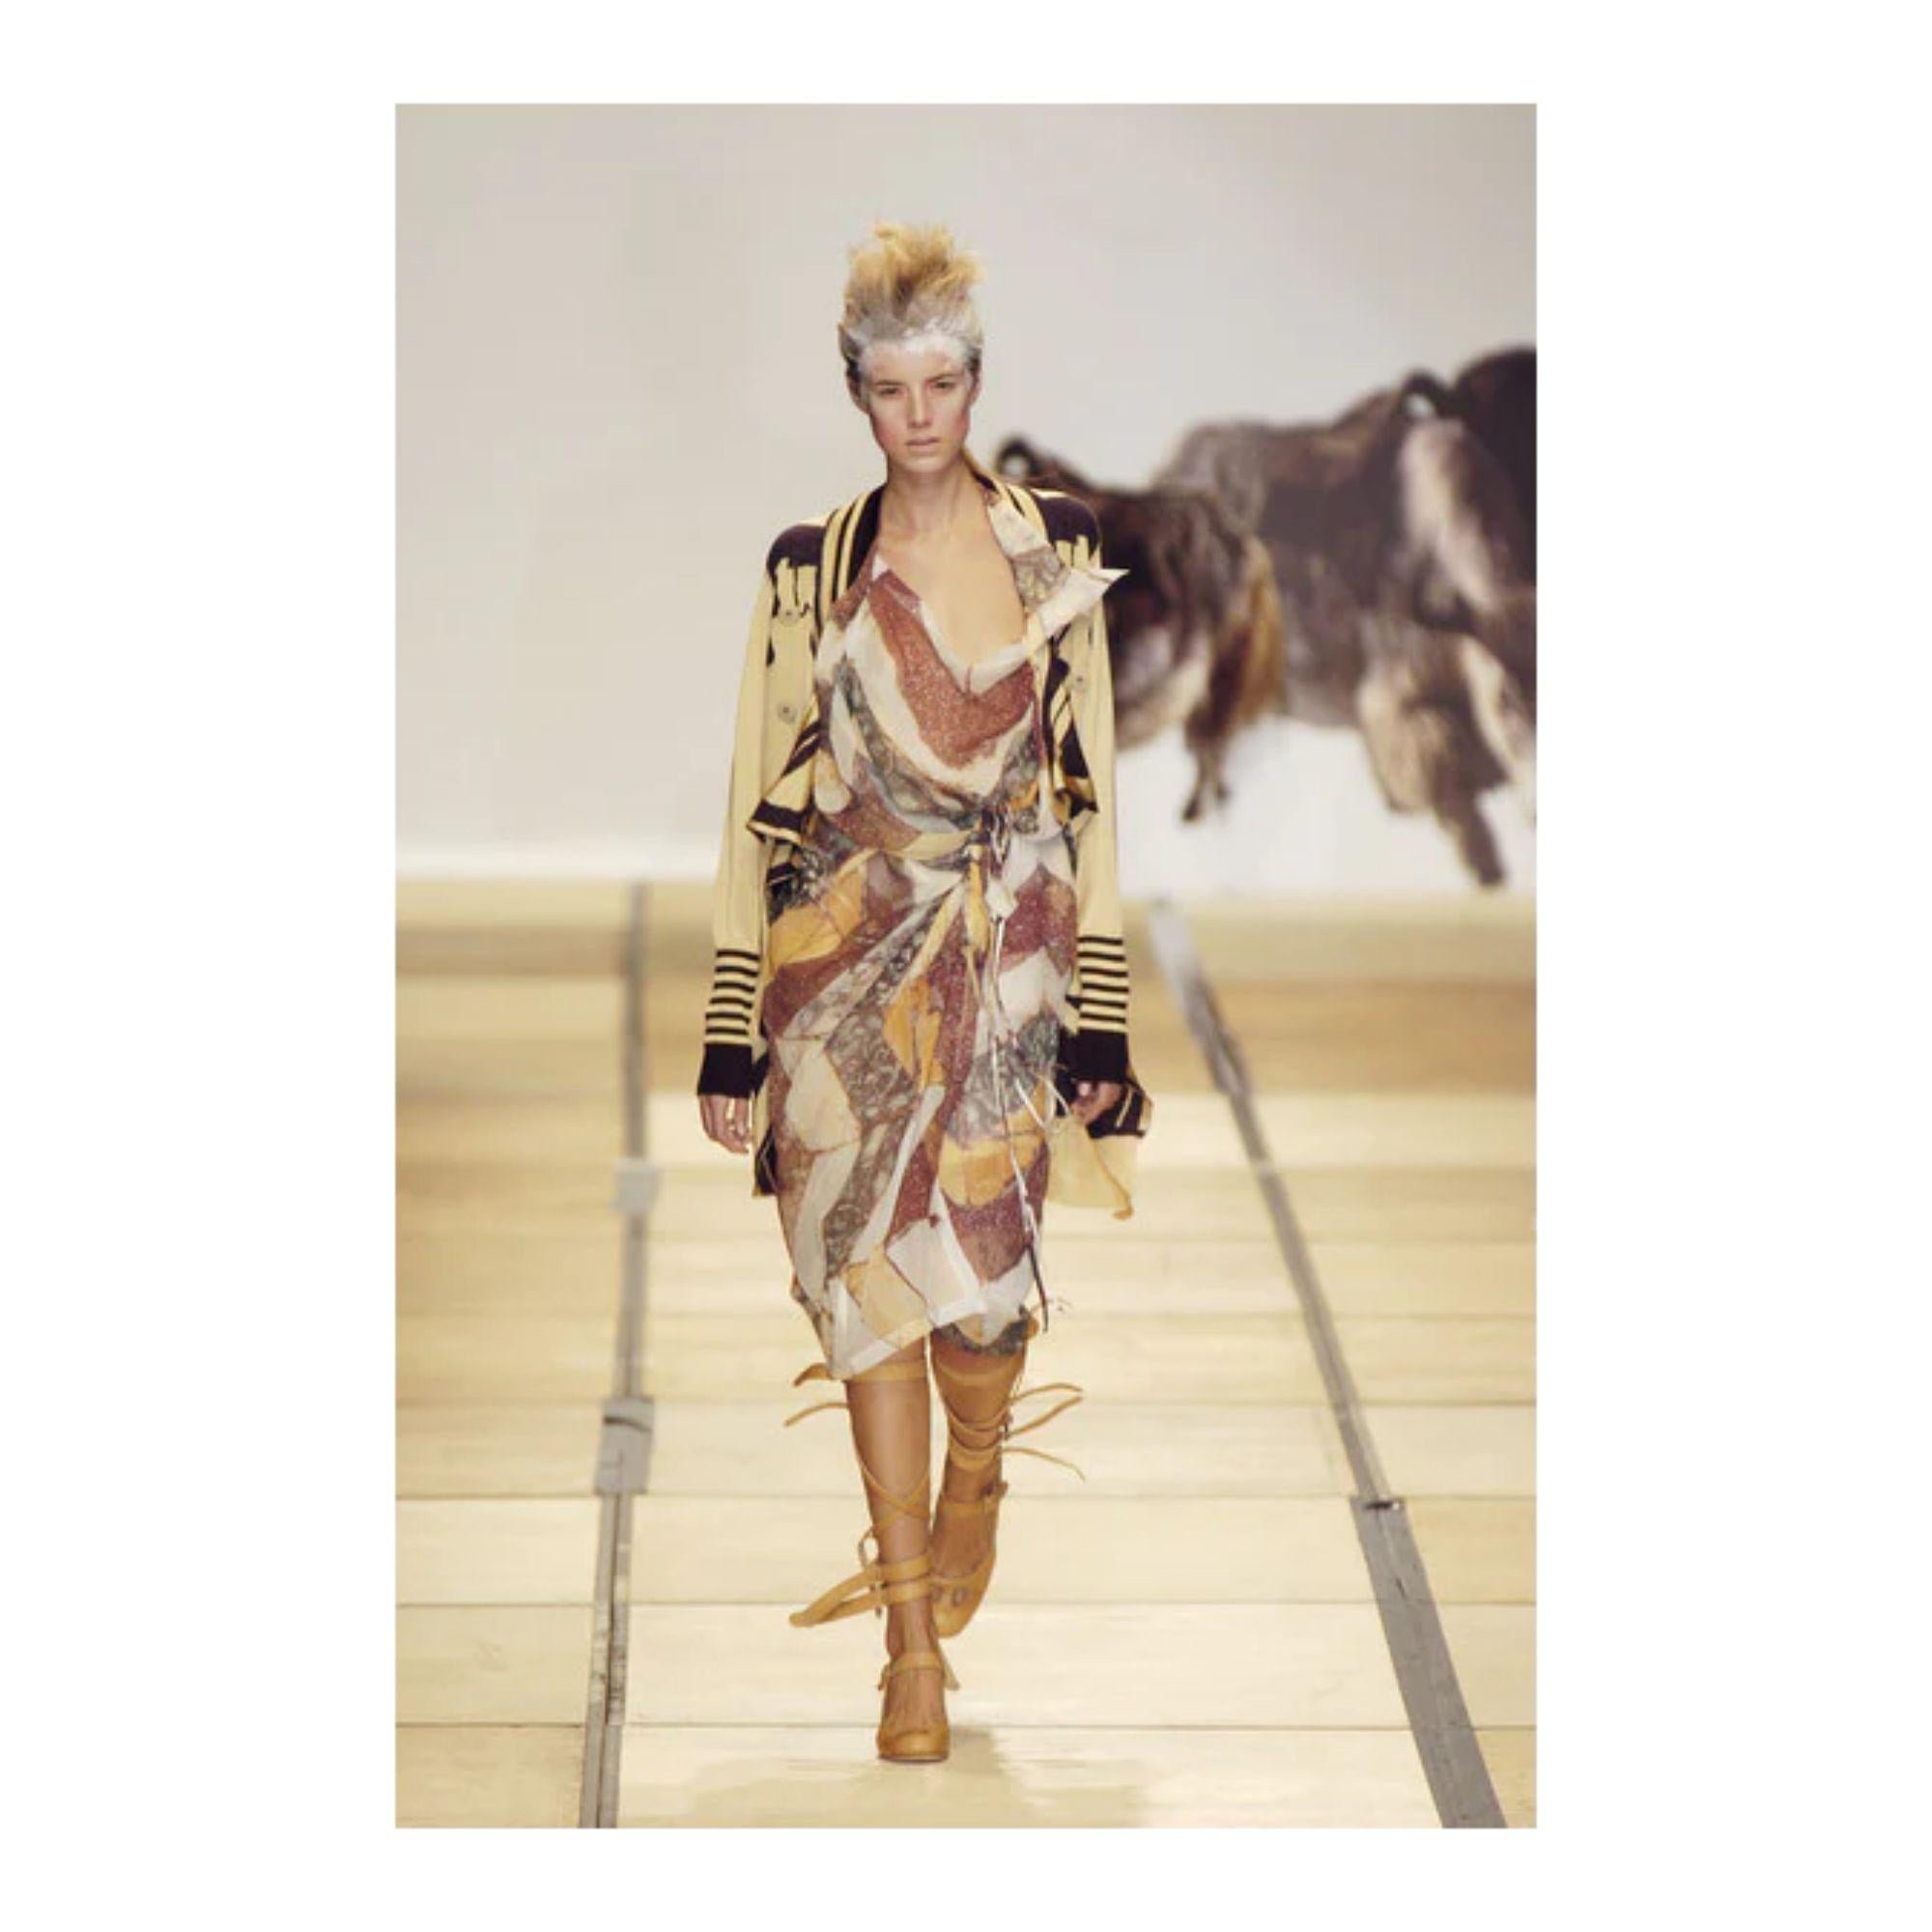 S/S 2005 Vivienne Westwood marble stripe print dress. Sculptural deconstructed semi-sheer silk dress with wrap tie at waist. High-low design with long point at back. Wrap tie can be styled in a variety of ways depending on desired effect and